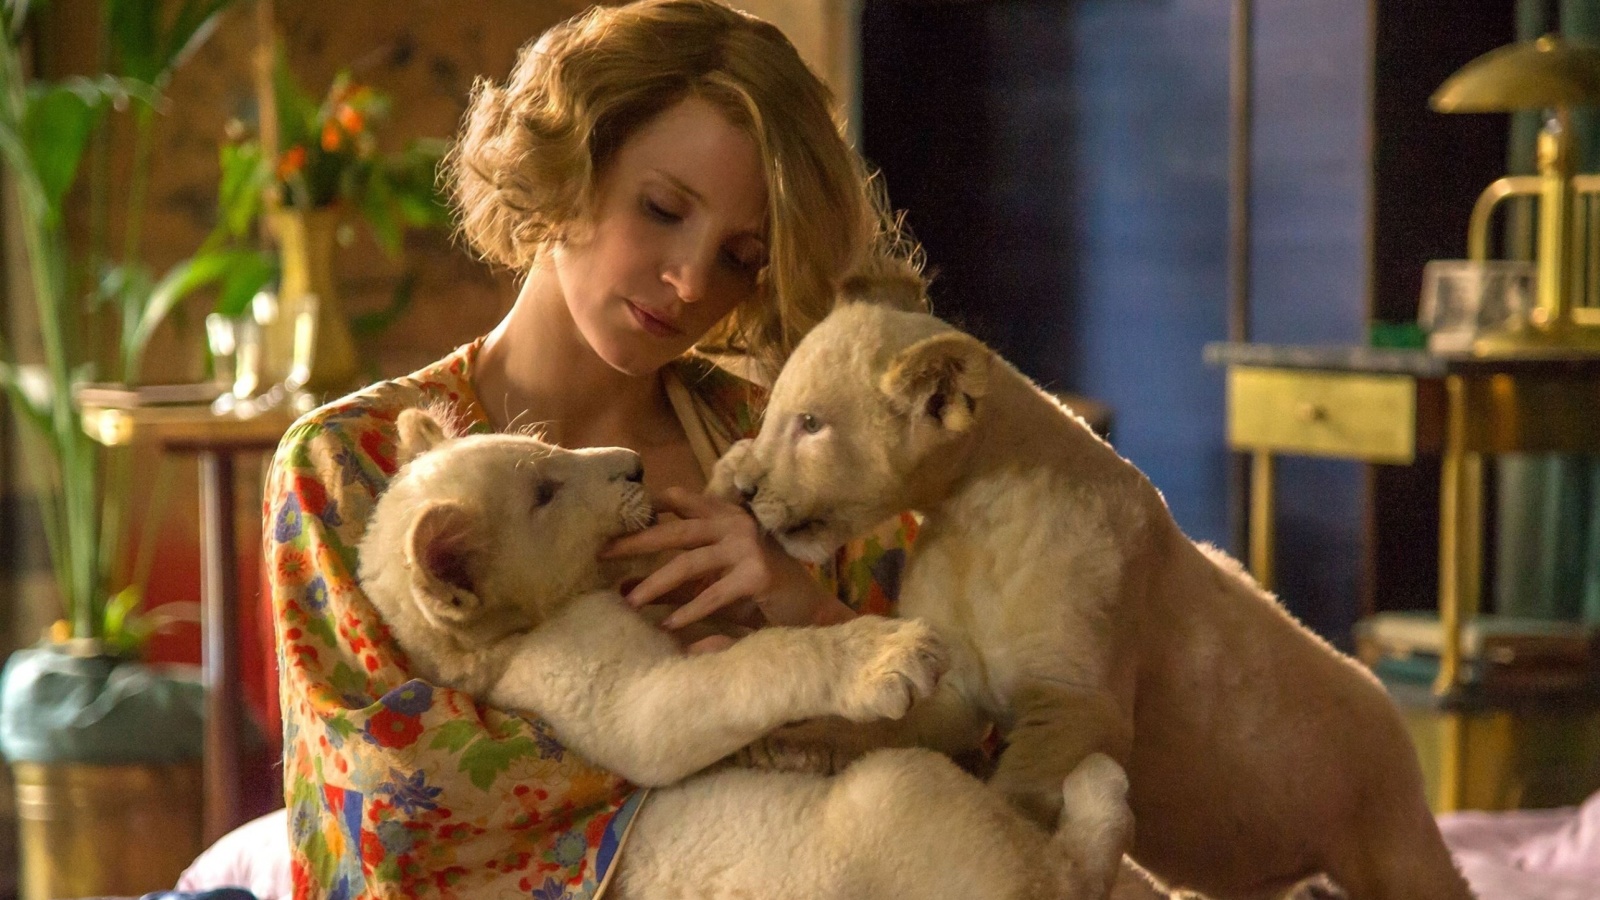 The Zookeepers Wife Film with Jessica Chastain wallpaper 1600x900